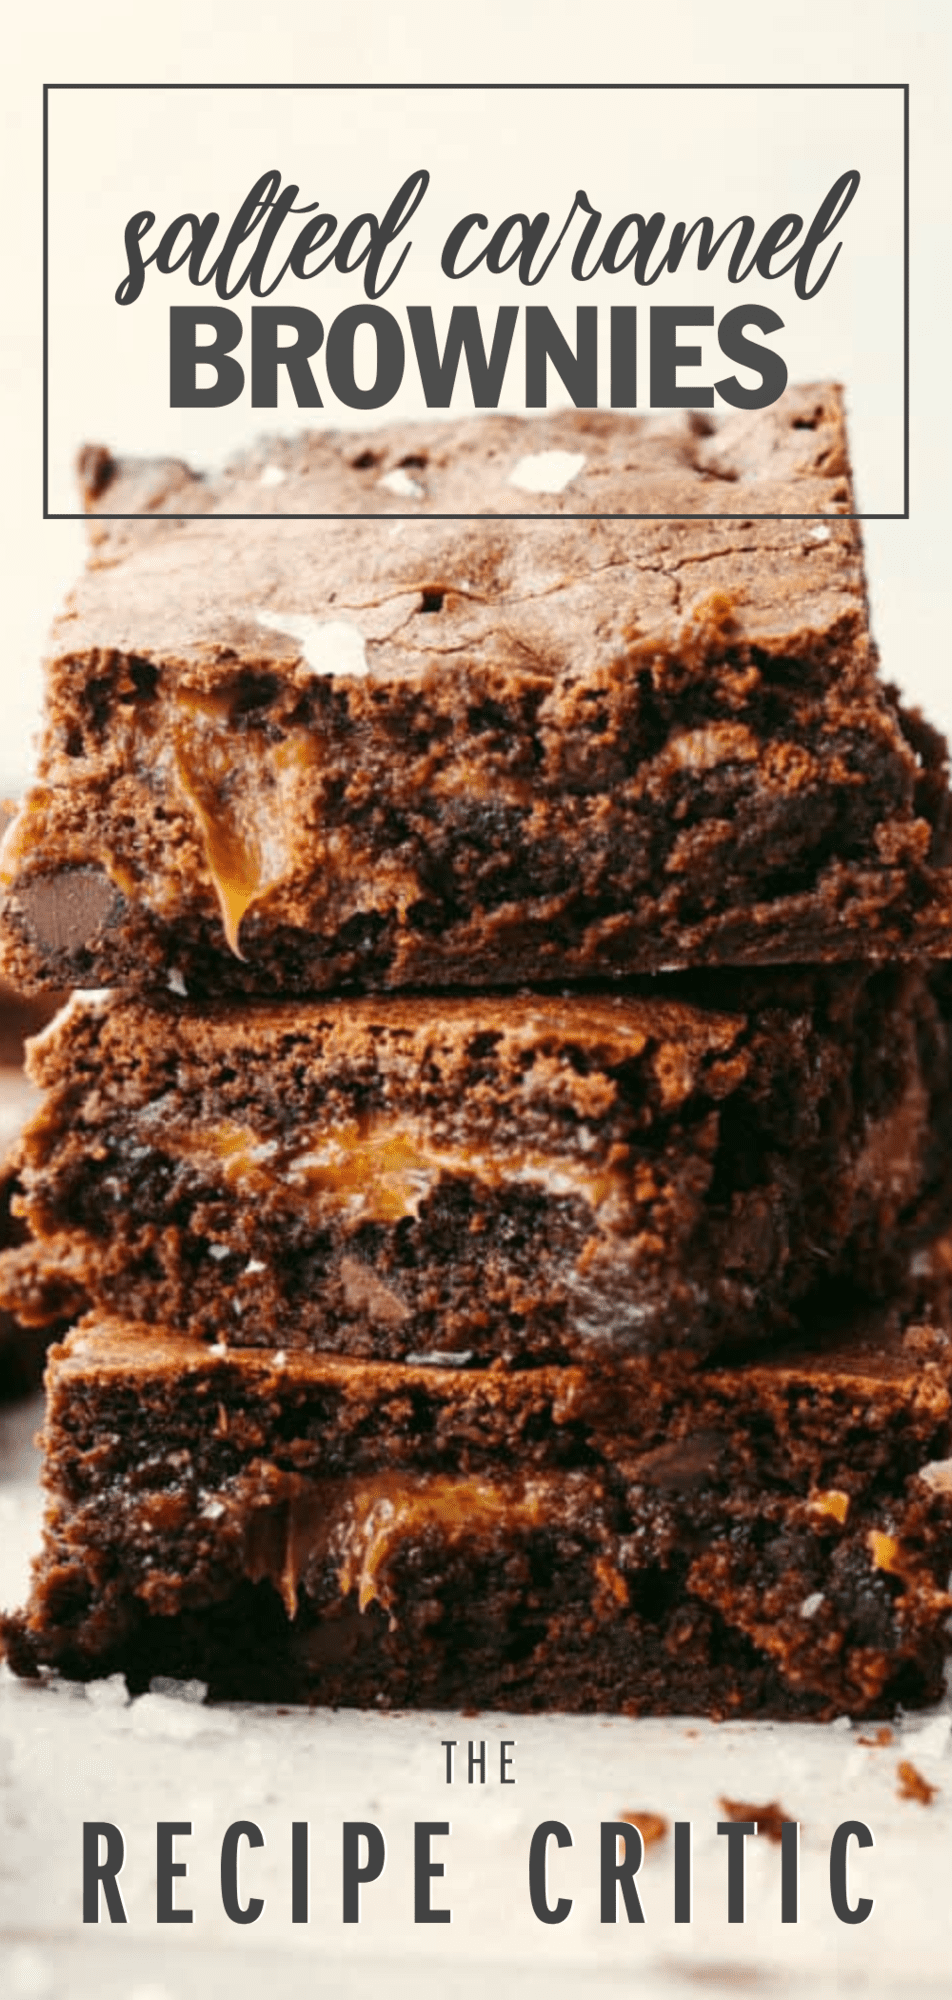 Easy Salted Caramel Brownies Recipe – The Recipe Critic